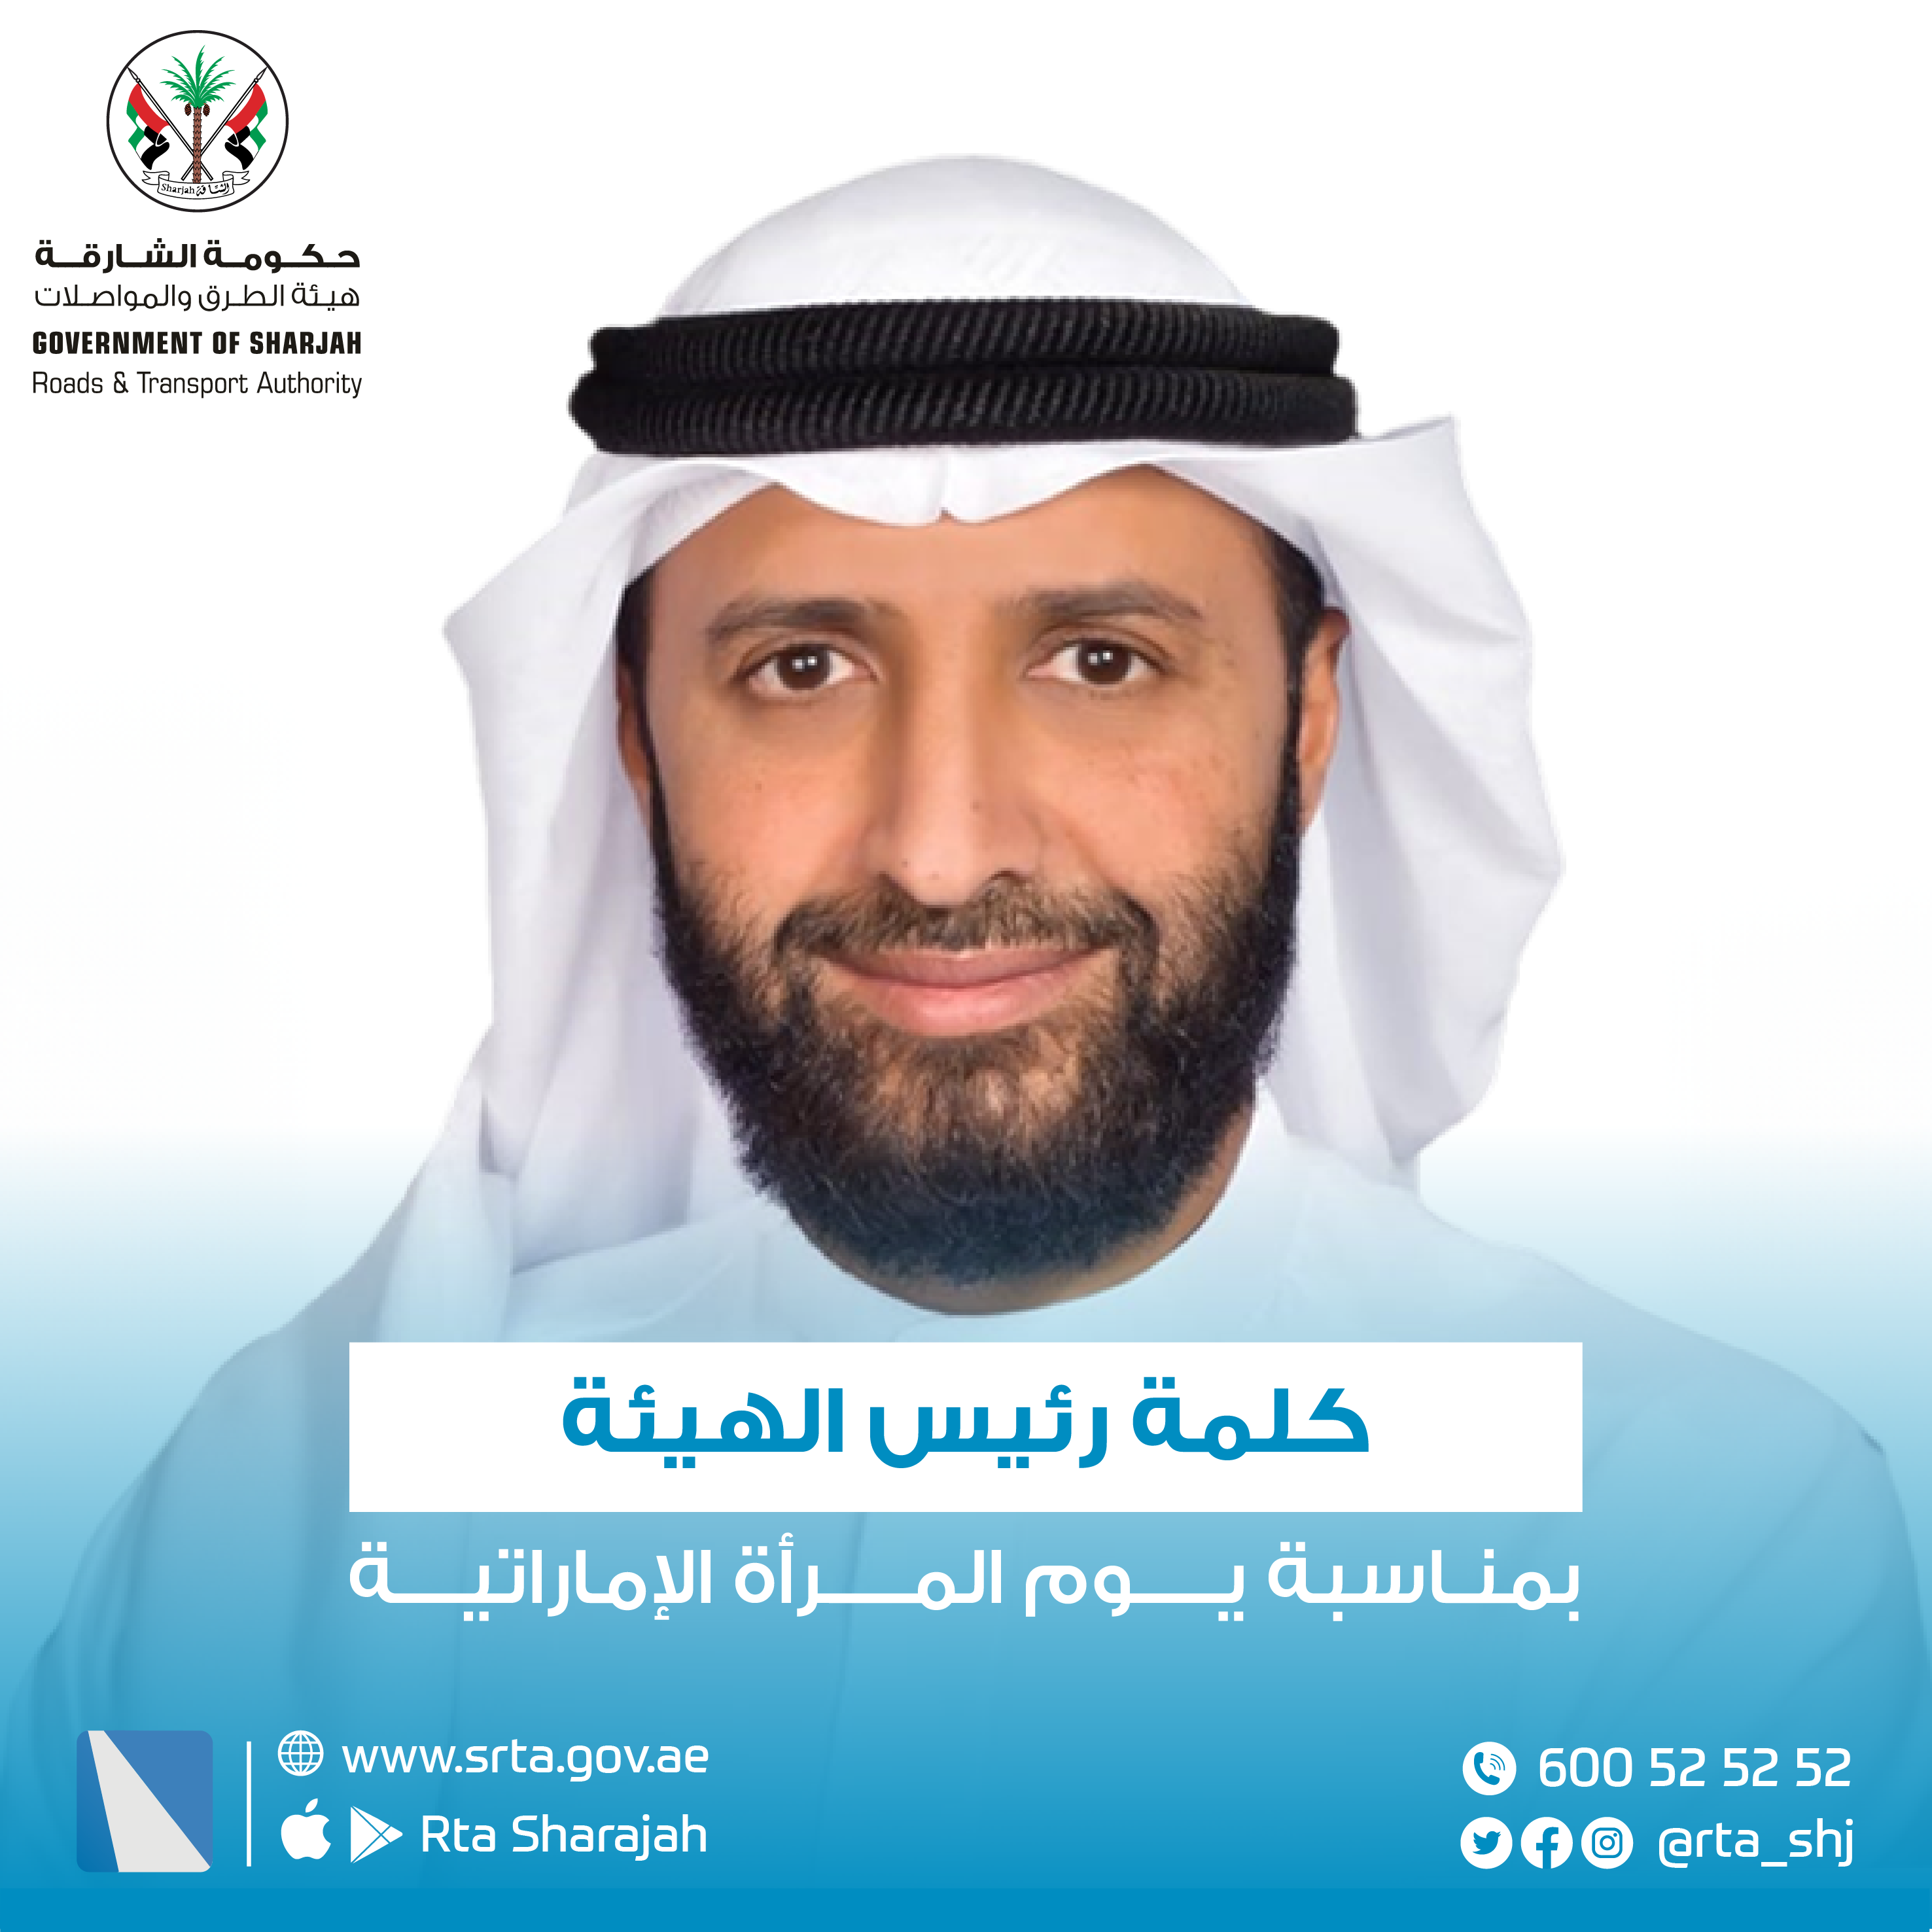 The Authority Chairman speech on the occasion of Emirati Women's Day